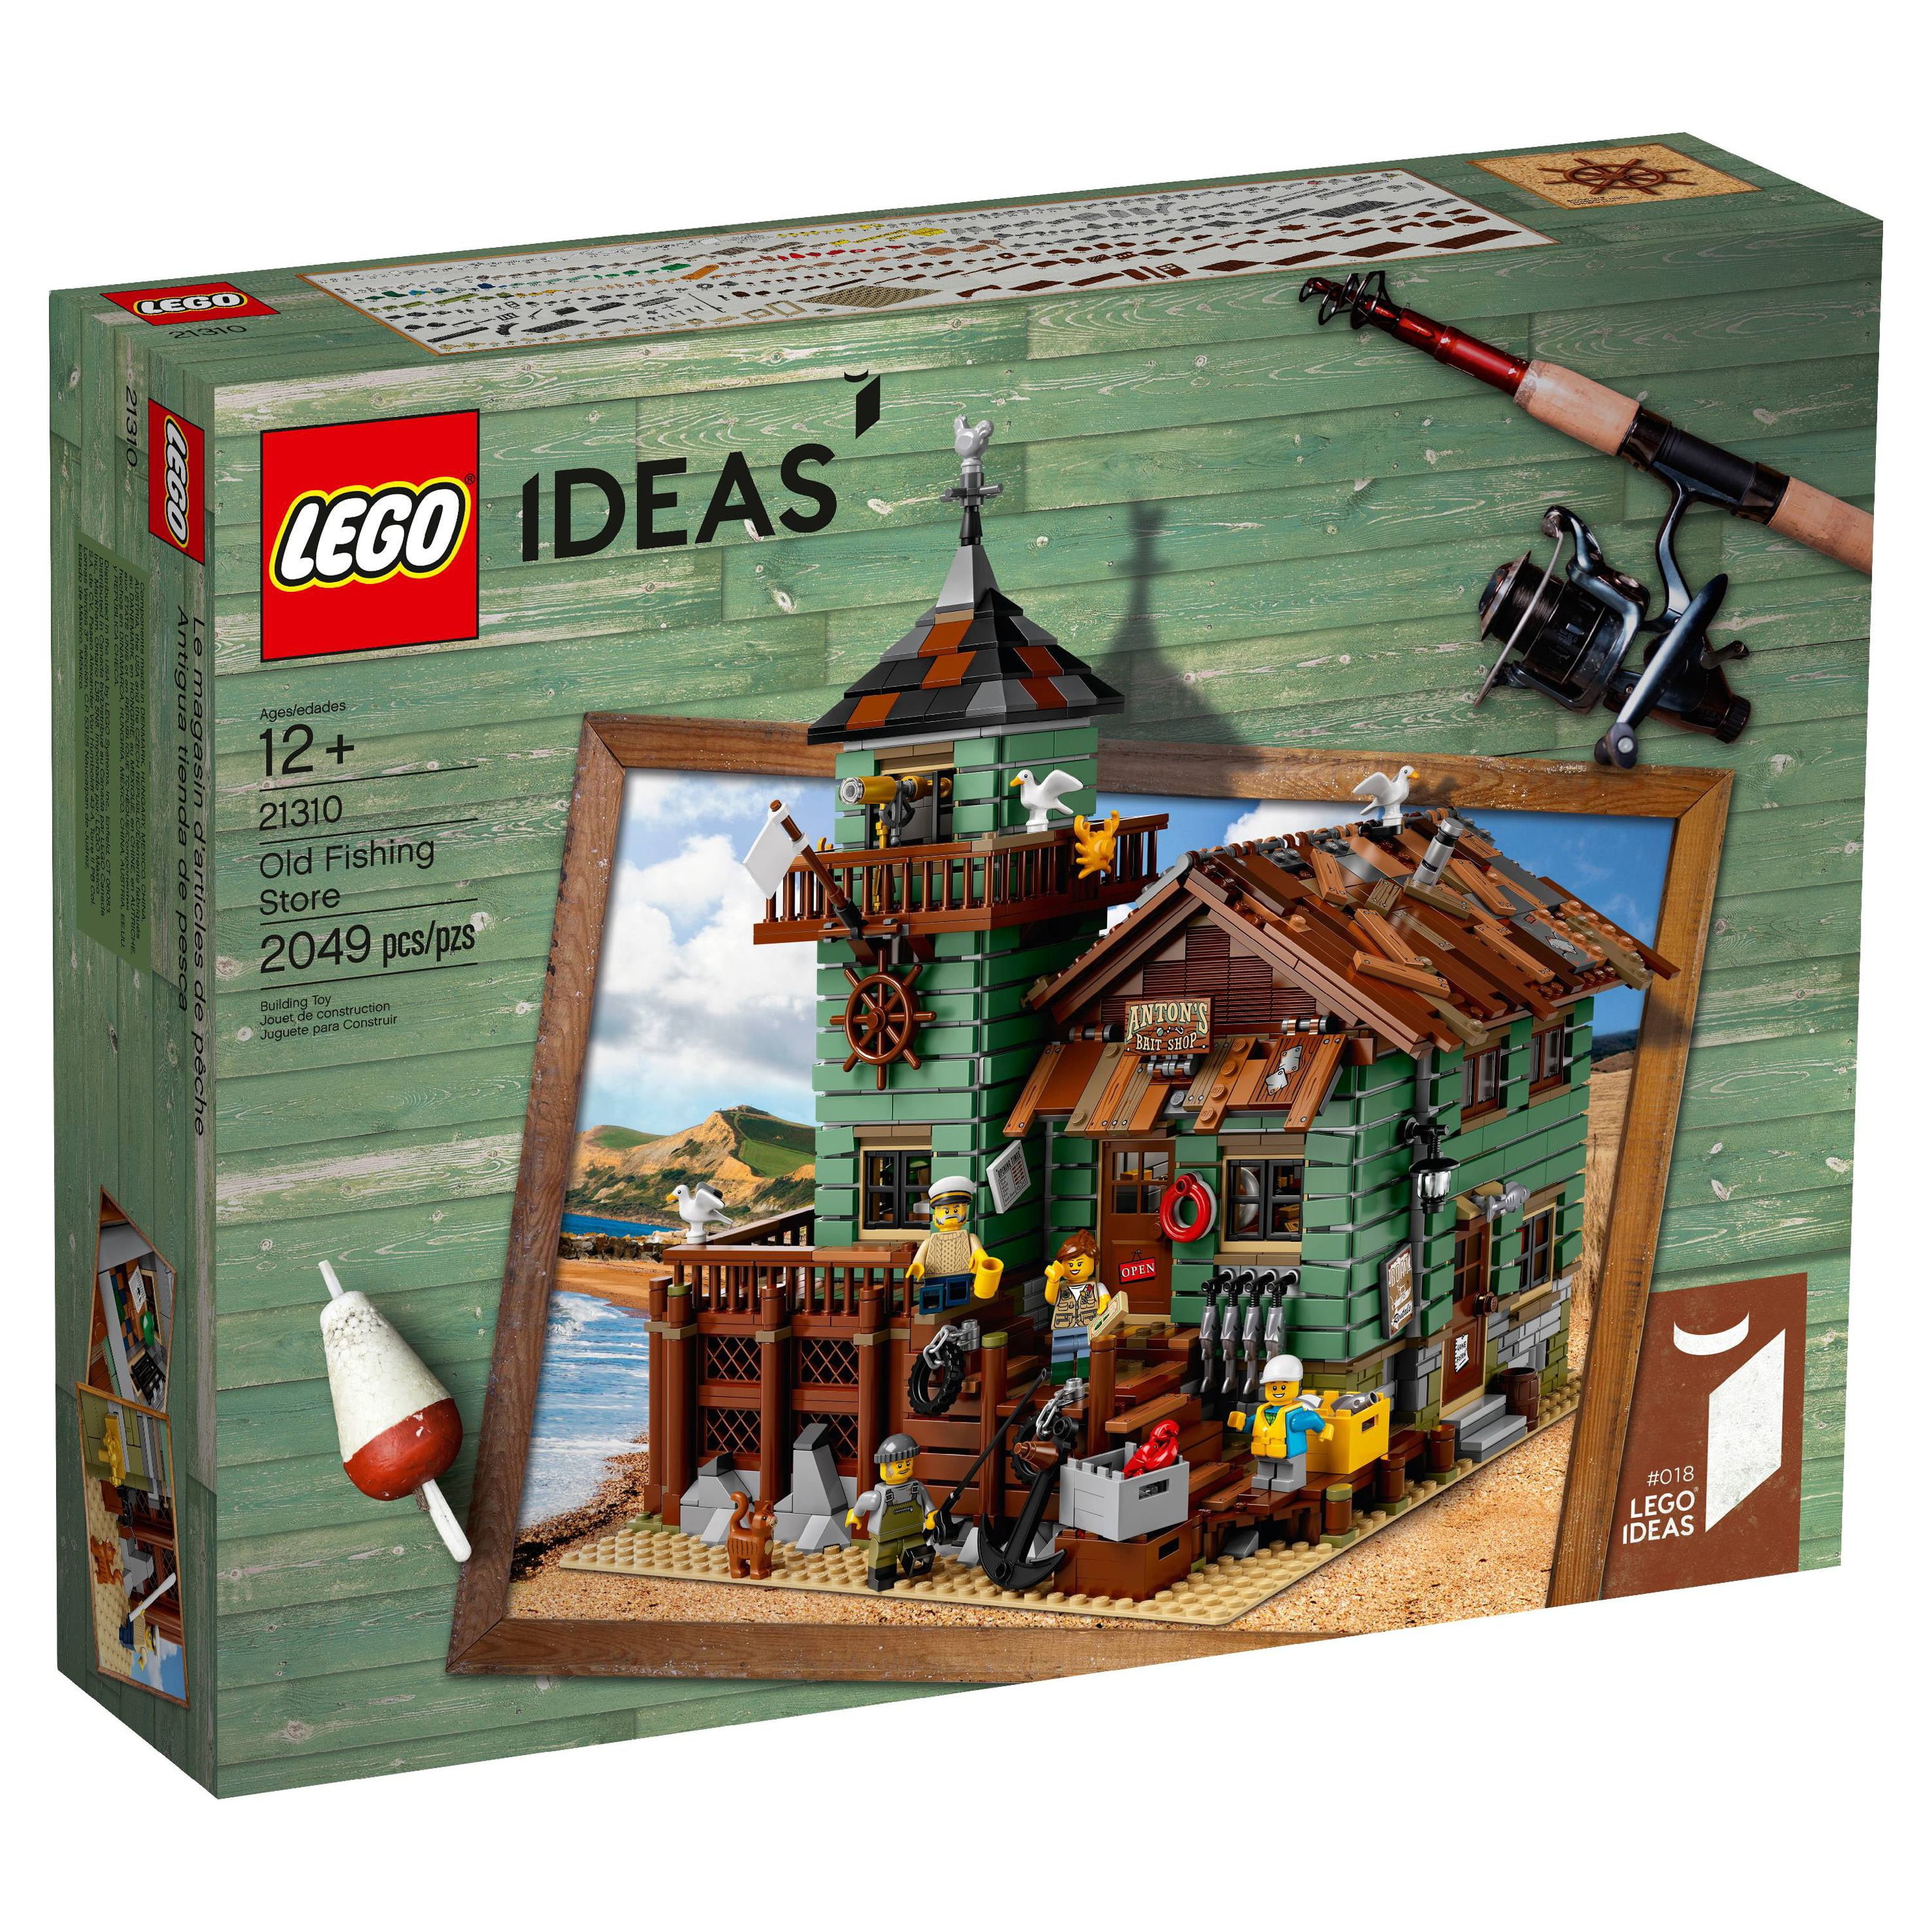 Lego 21310 Ideas Old Fishing Store